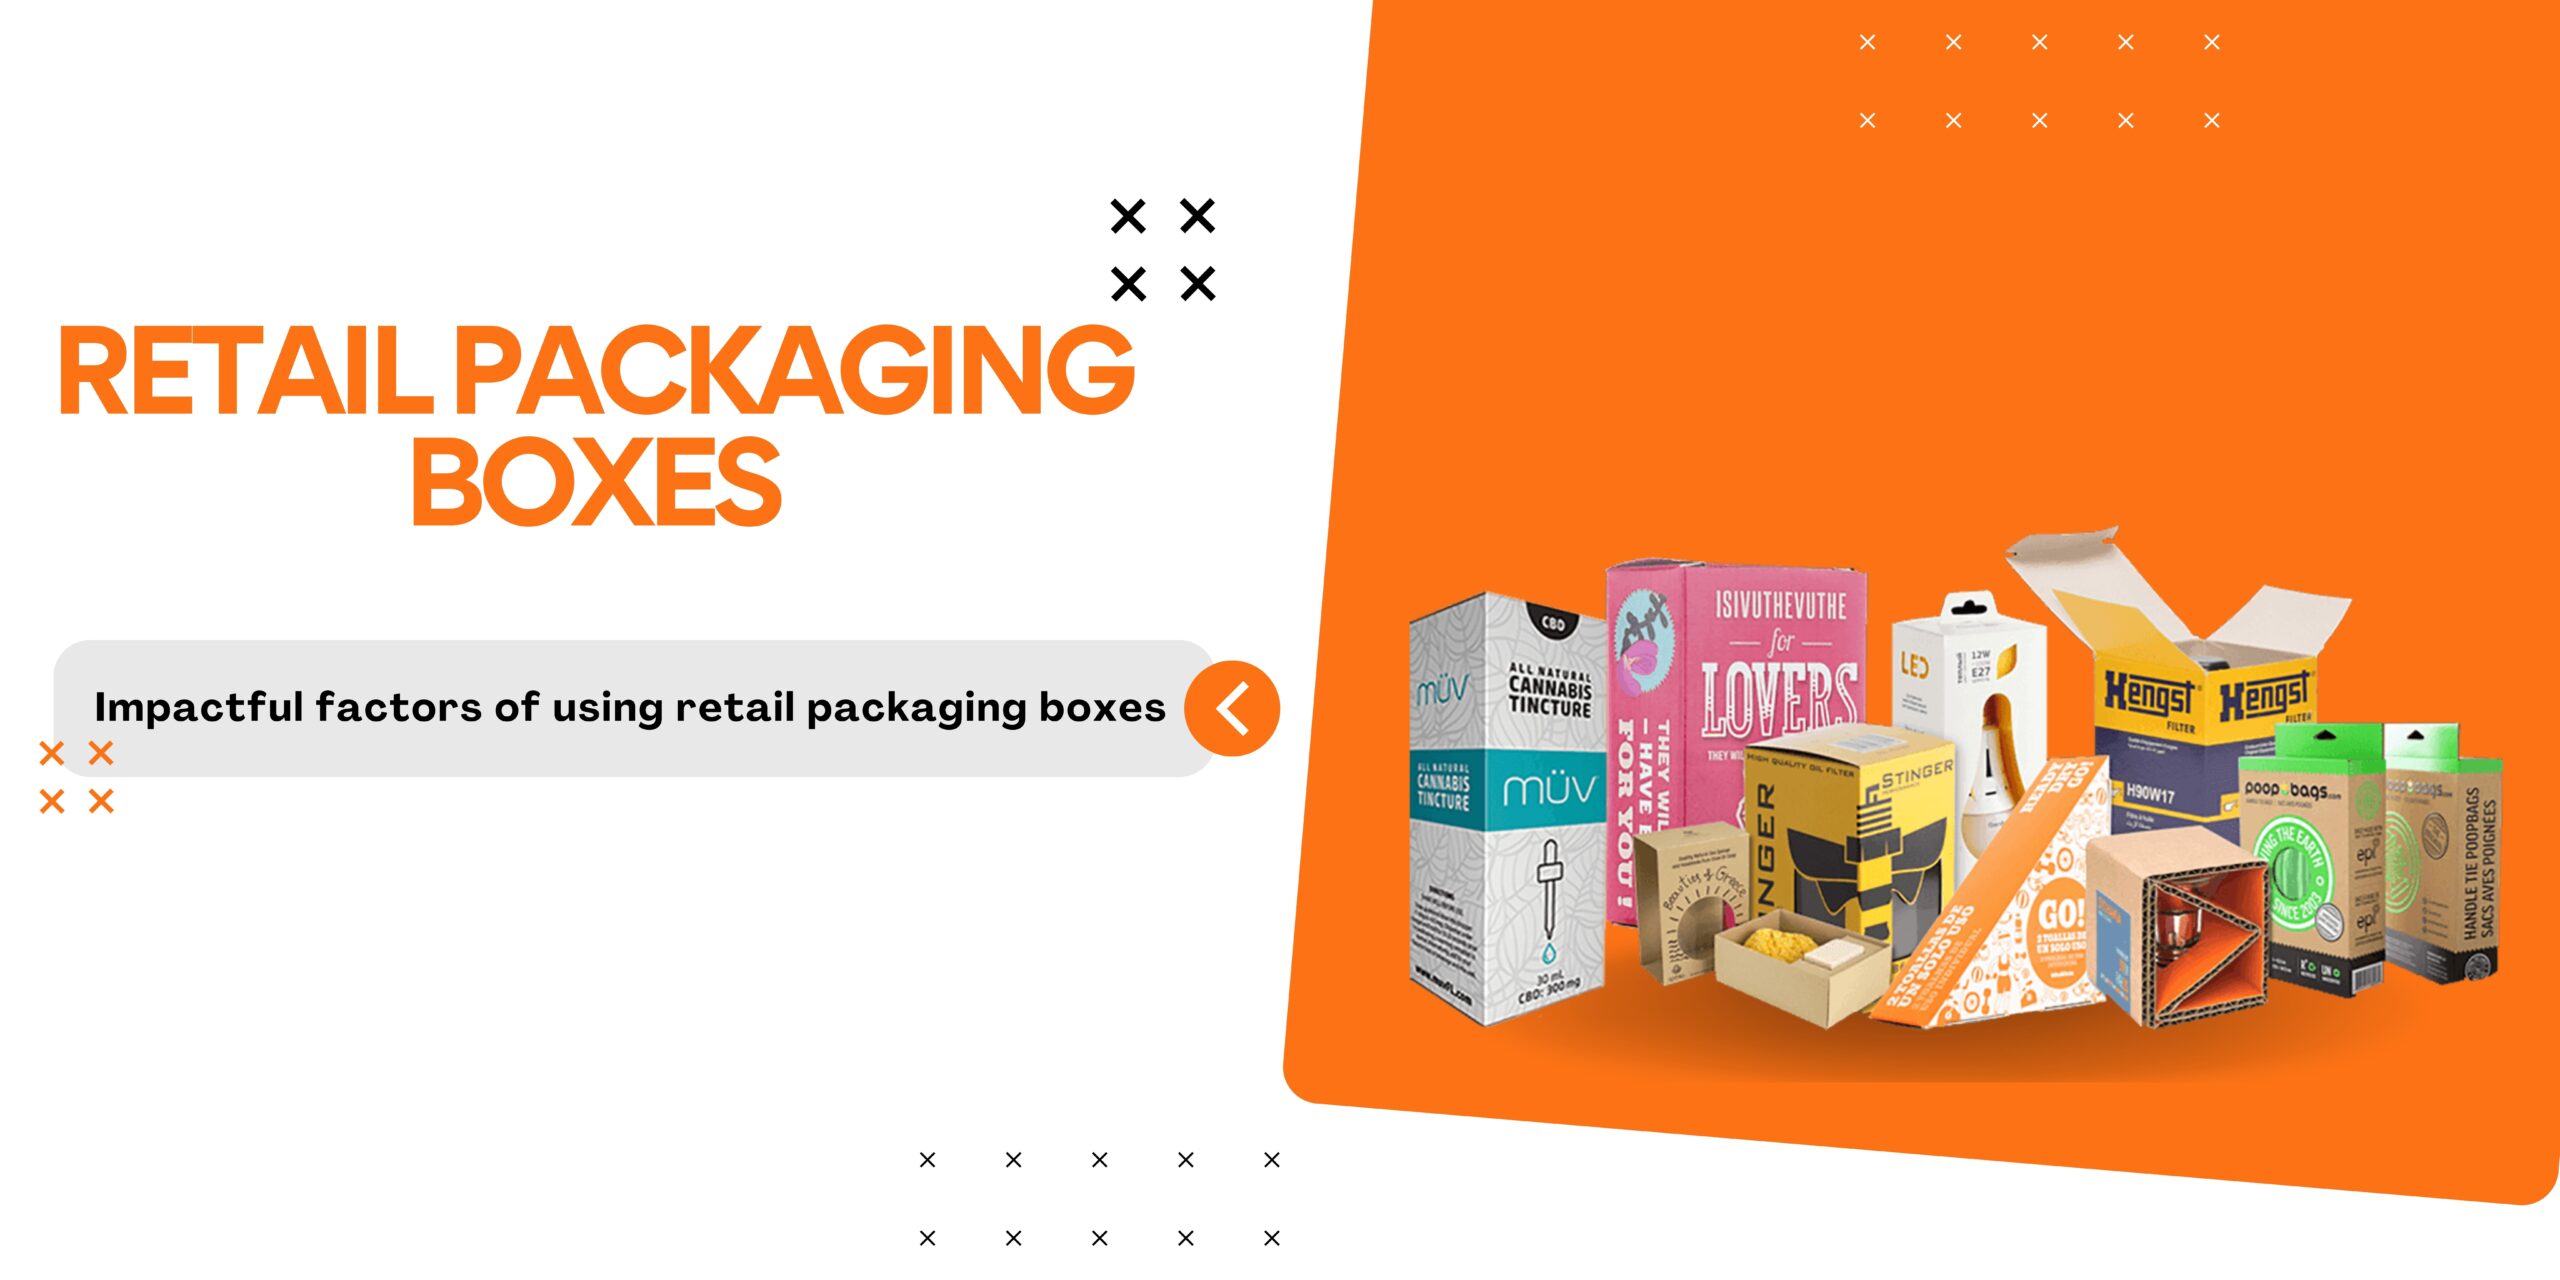 Impactful Factors of Using Retail Packaging Boxes